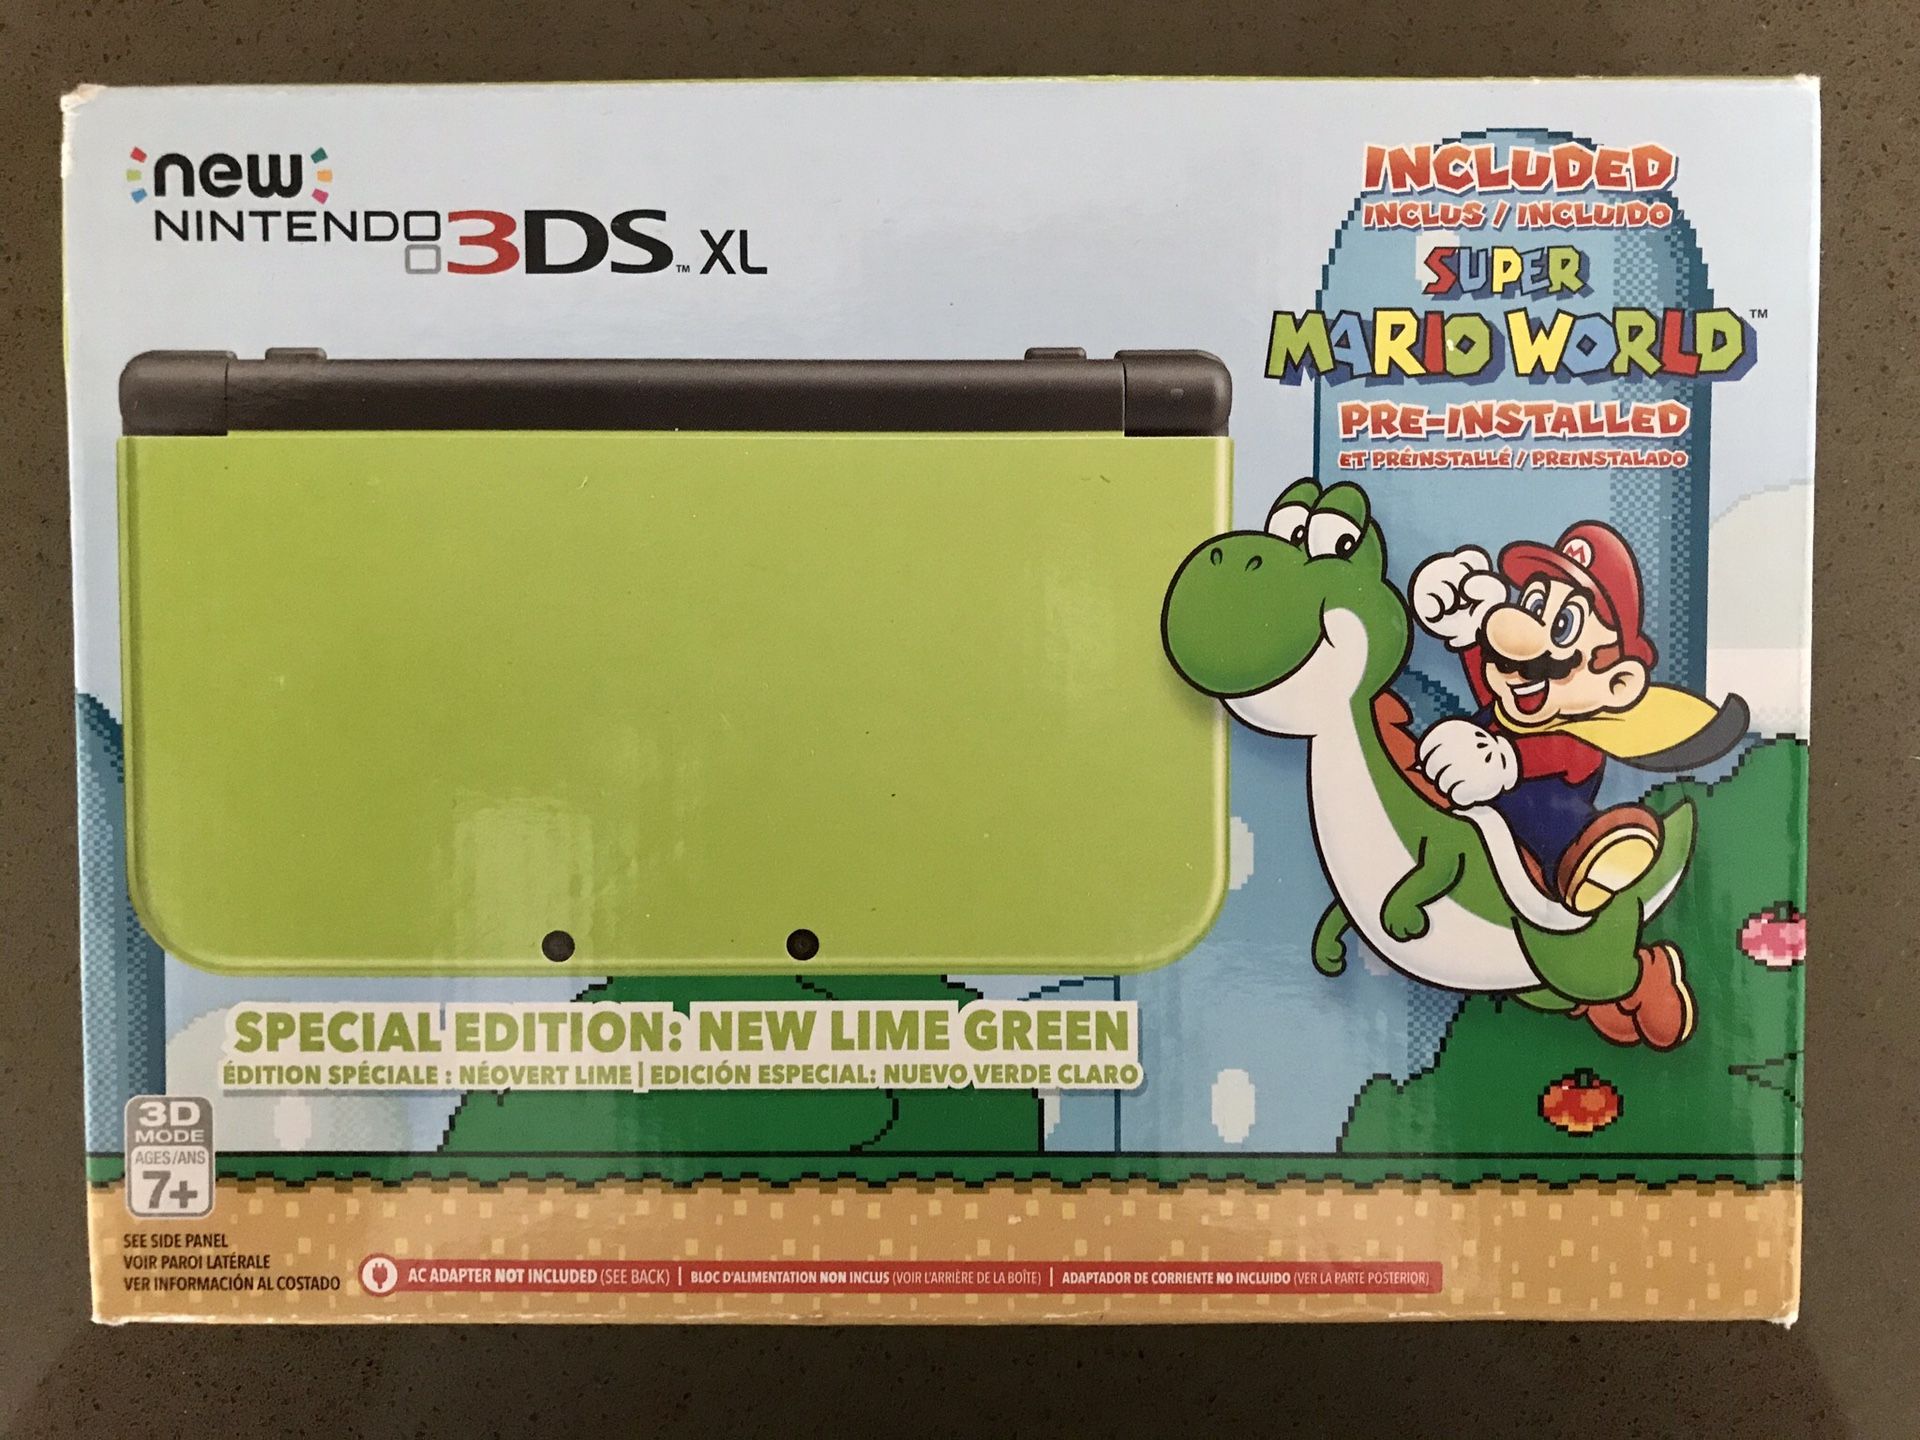 Nintendo 3DS XL New Lime Green Limited Edition with 5 awesome games and original accessories.